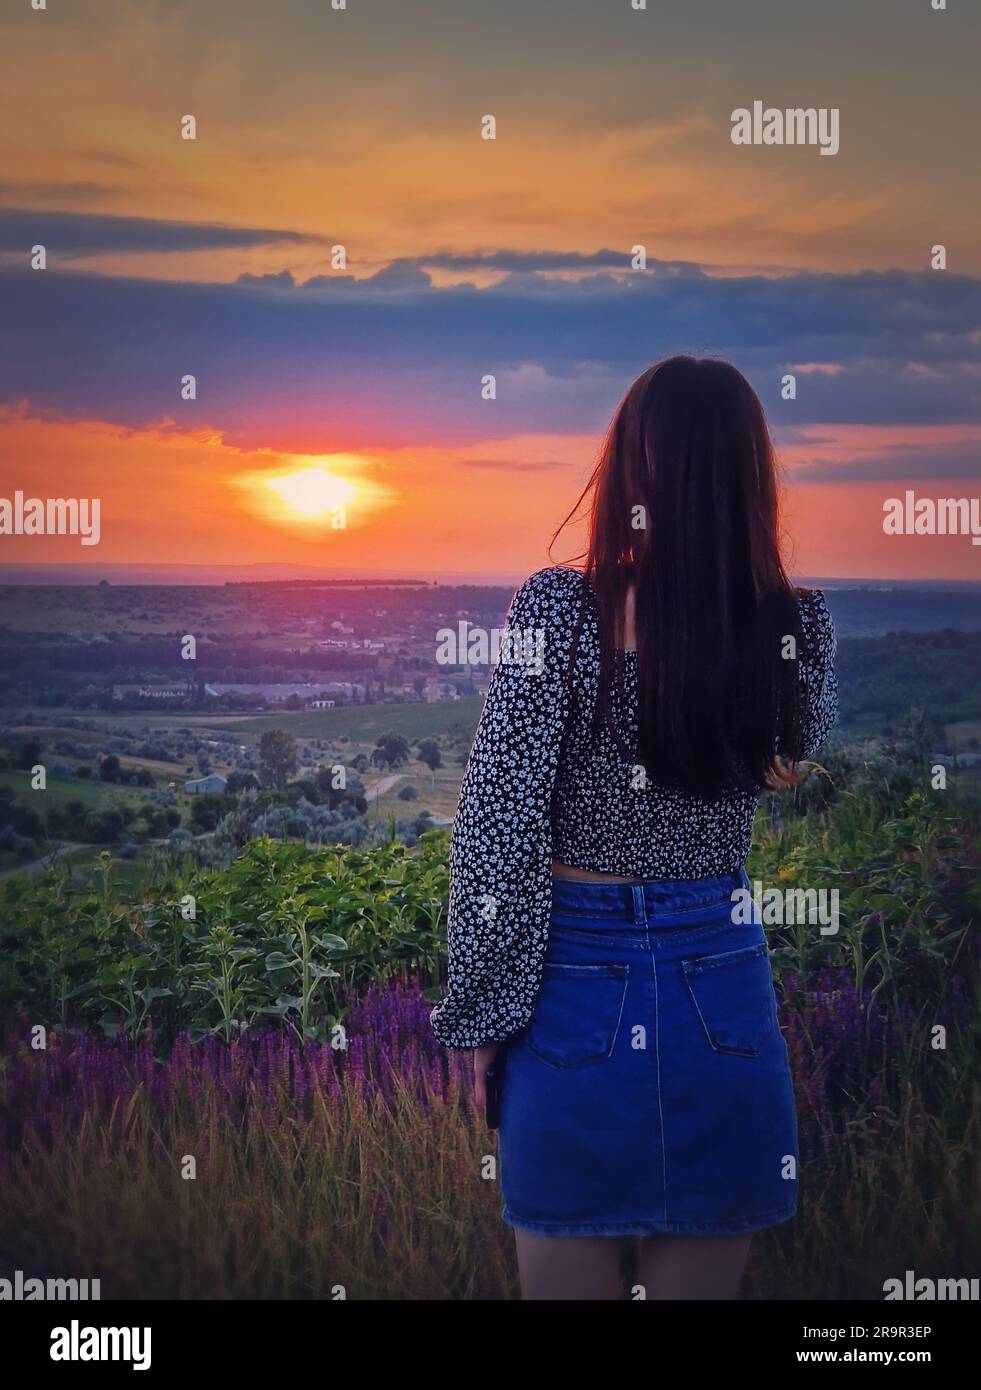 Rear view of a woman in skirt watching the sunset over the valley. Natural summer dusk scene Stock Photo